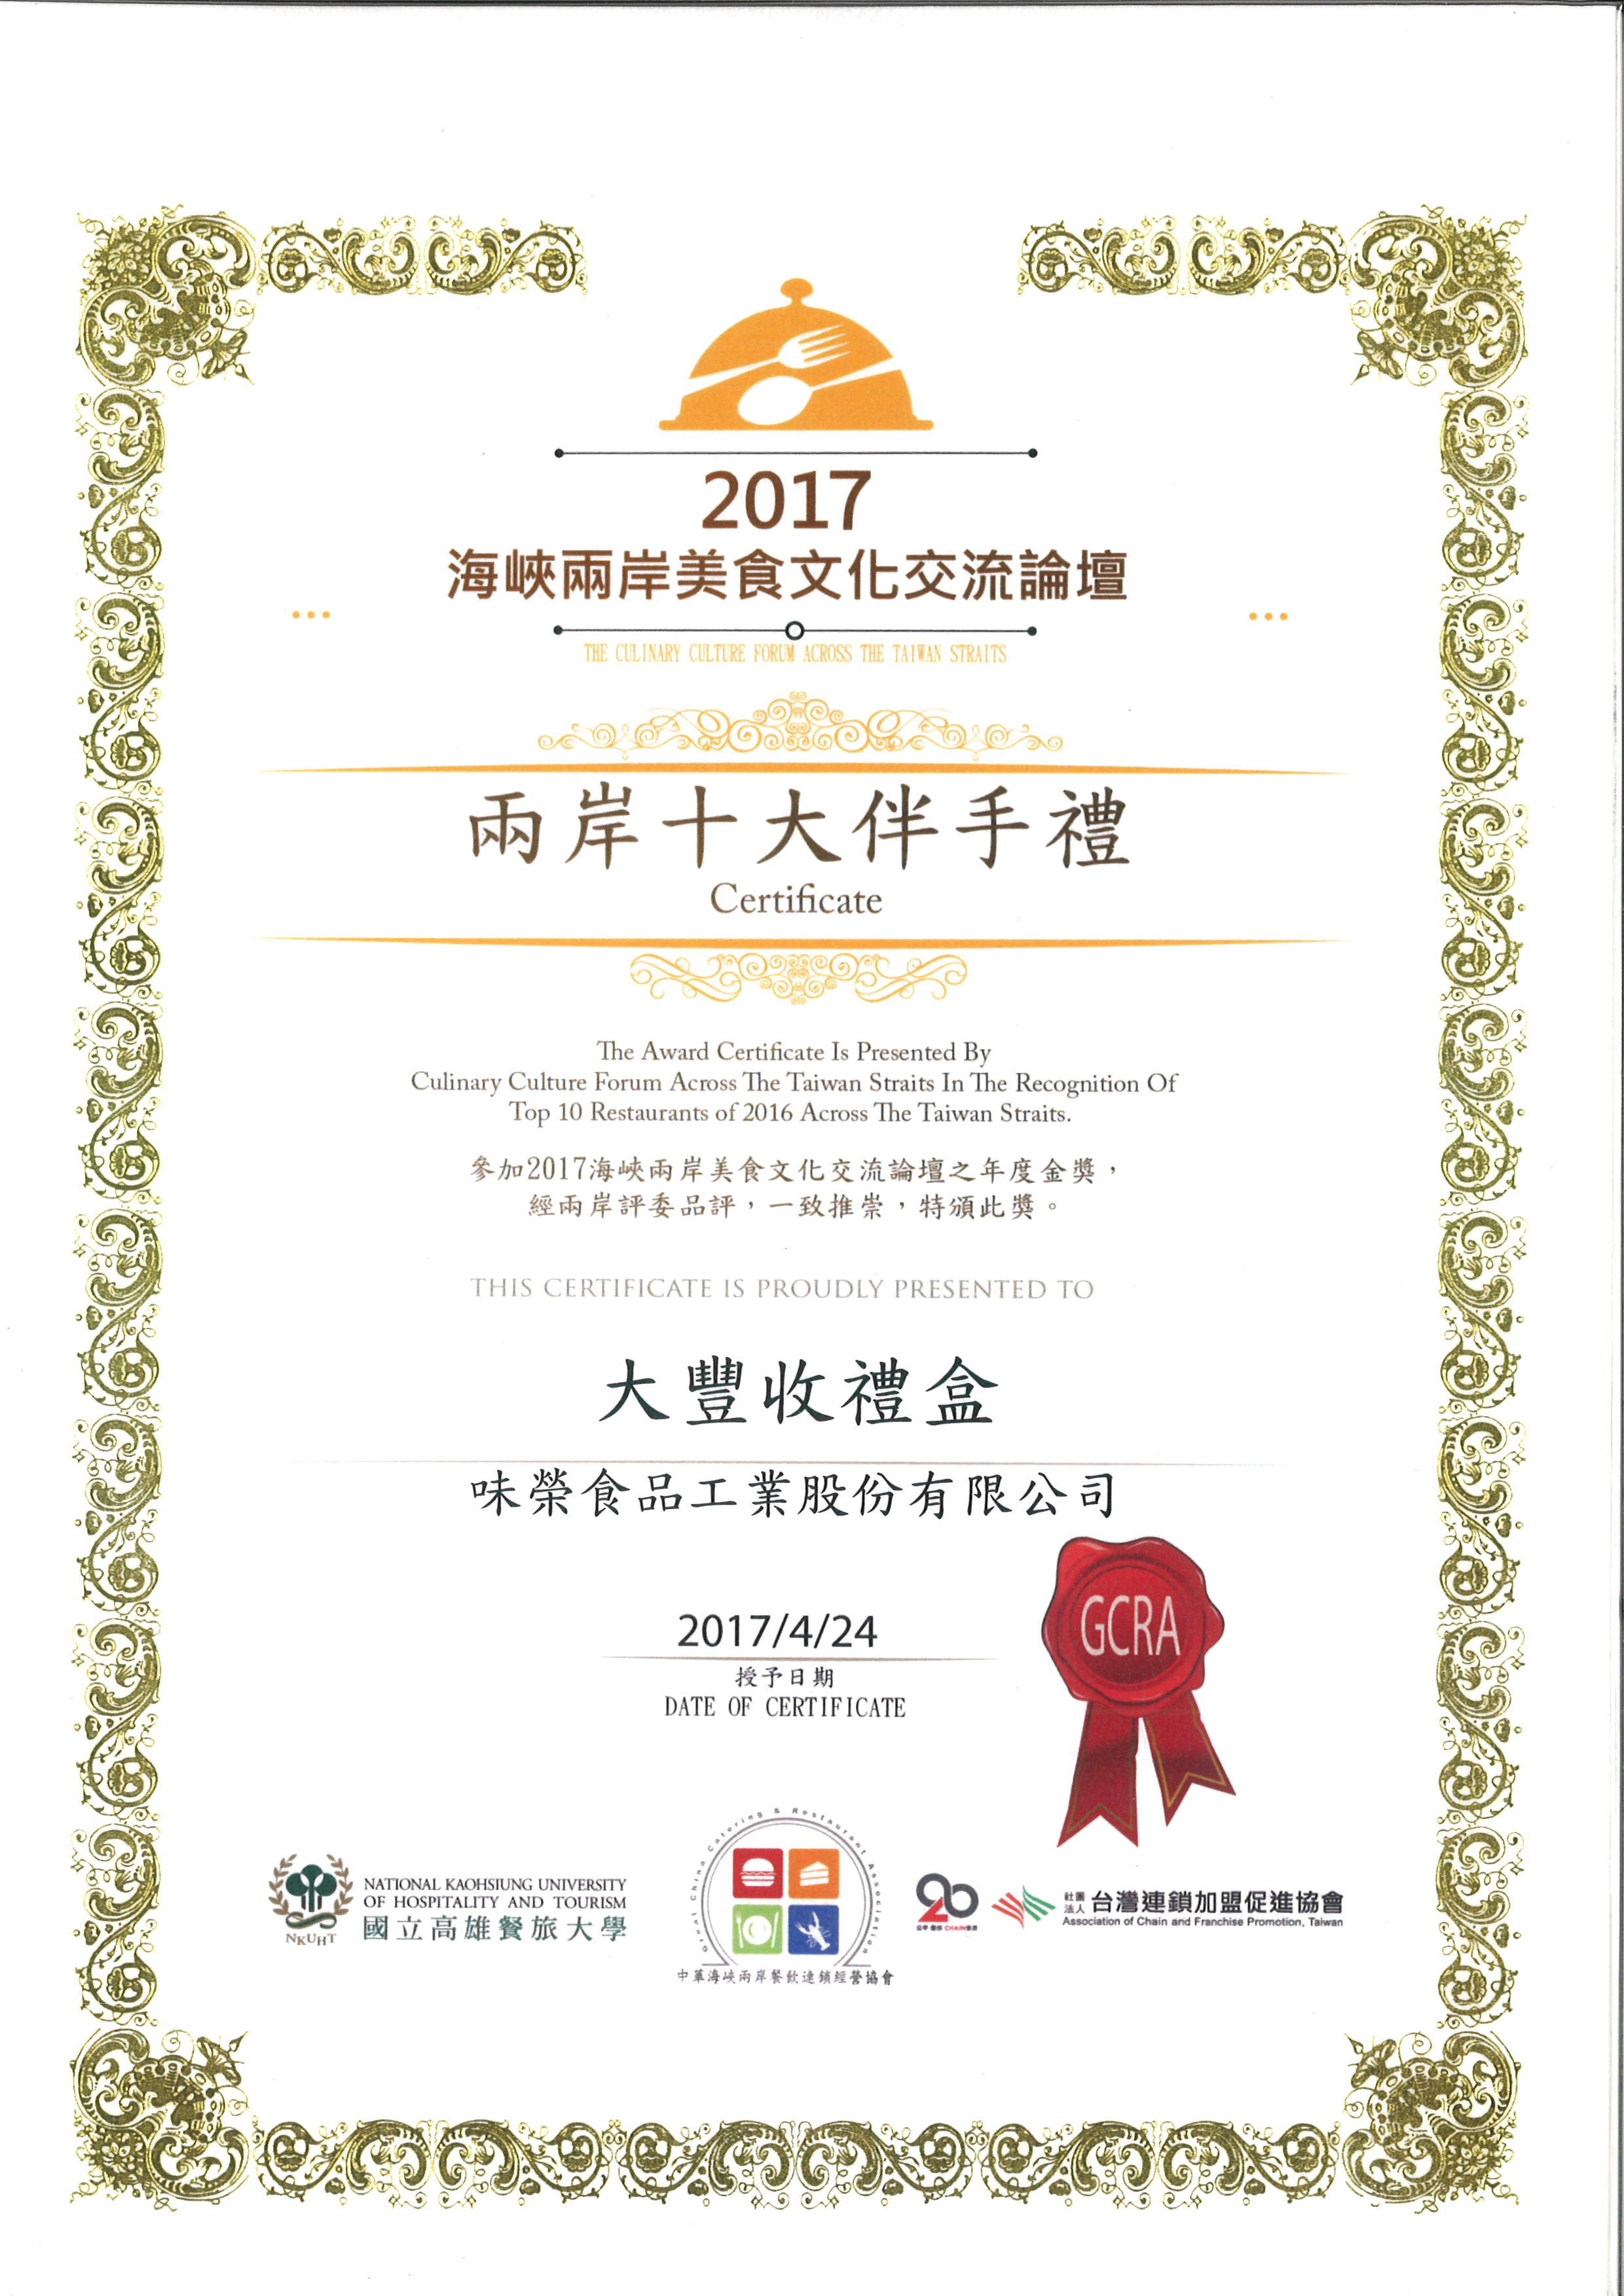 [Great Harvest Gift Box] Won the 7th Cross-Strait Food and Culture Exchange Forum - Top Ten Cross-Strait Souvenirs & Won the "Top 100 Souvenirs" specially selected by the Taiwan Provincial Chamber of Commerce 106th Chamber of Commerce